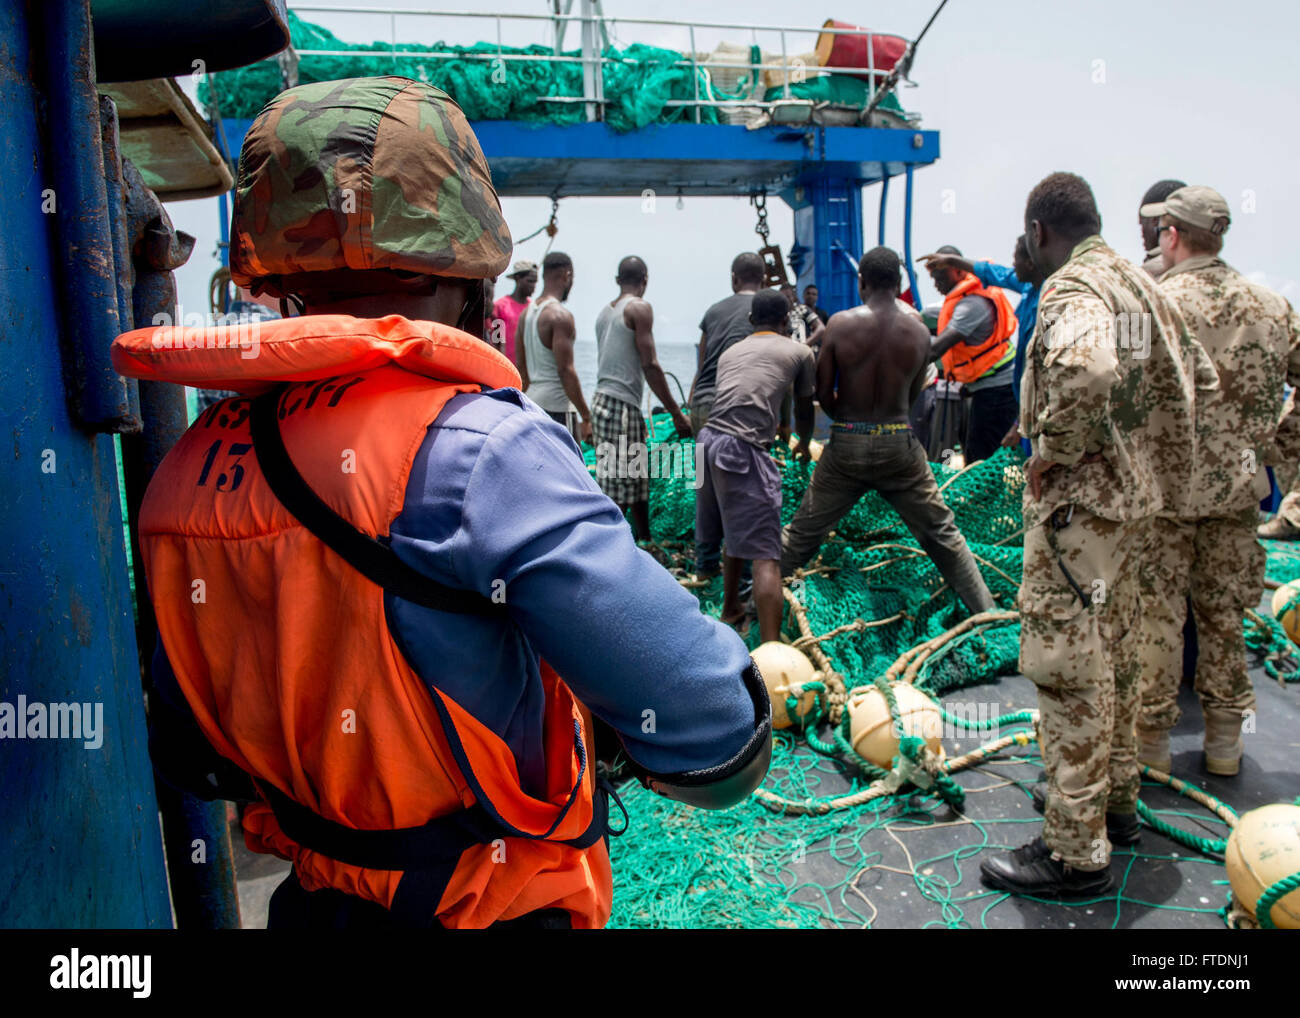 160320-N-EZ054-072  GULF OF GUINEA (March 20, 2016) - A Ghanaian Navy boarding team member stands guard as fisherman are instructed to lay out the fishing nets during an illegal fishing scenario as part of Exercise Obangame/Saharan Express 2016, March 20. Obangame/Saharan Express, one of three African regional express series exercises facilitated by U.S. Naval Forces Europe-Africa/U.S. 6th Fleet, seeks to increase regional cooperation, maritime domain awareness, information sharing practices and improve interoperability among participating forces in order to enhance maritime security and regio Stock Photo